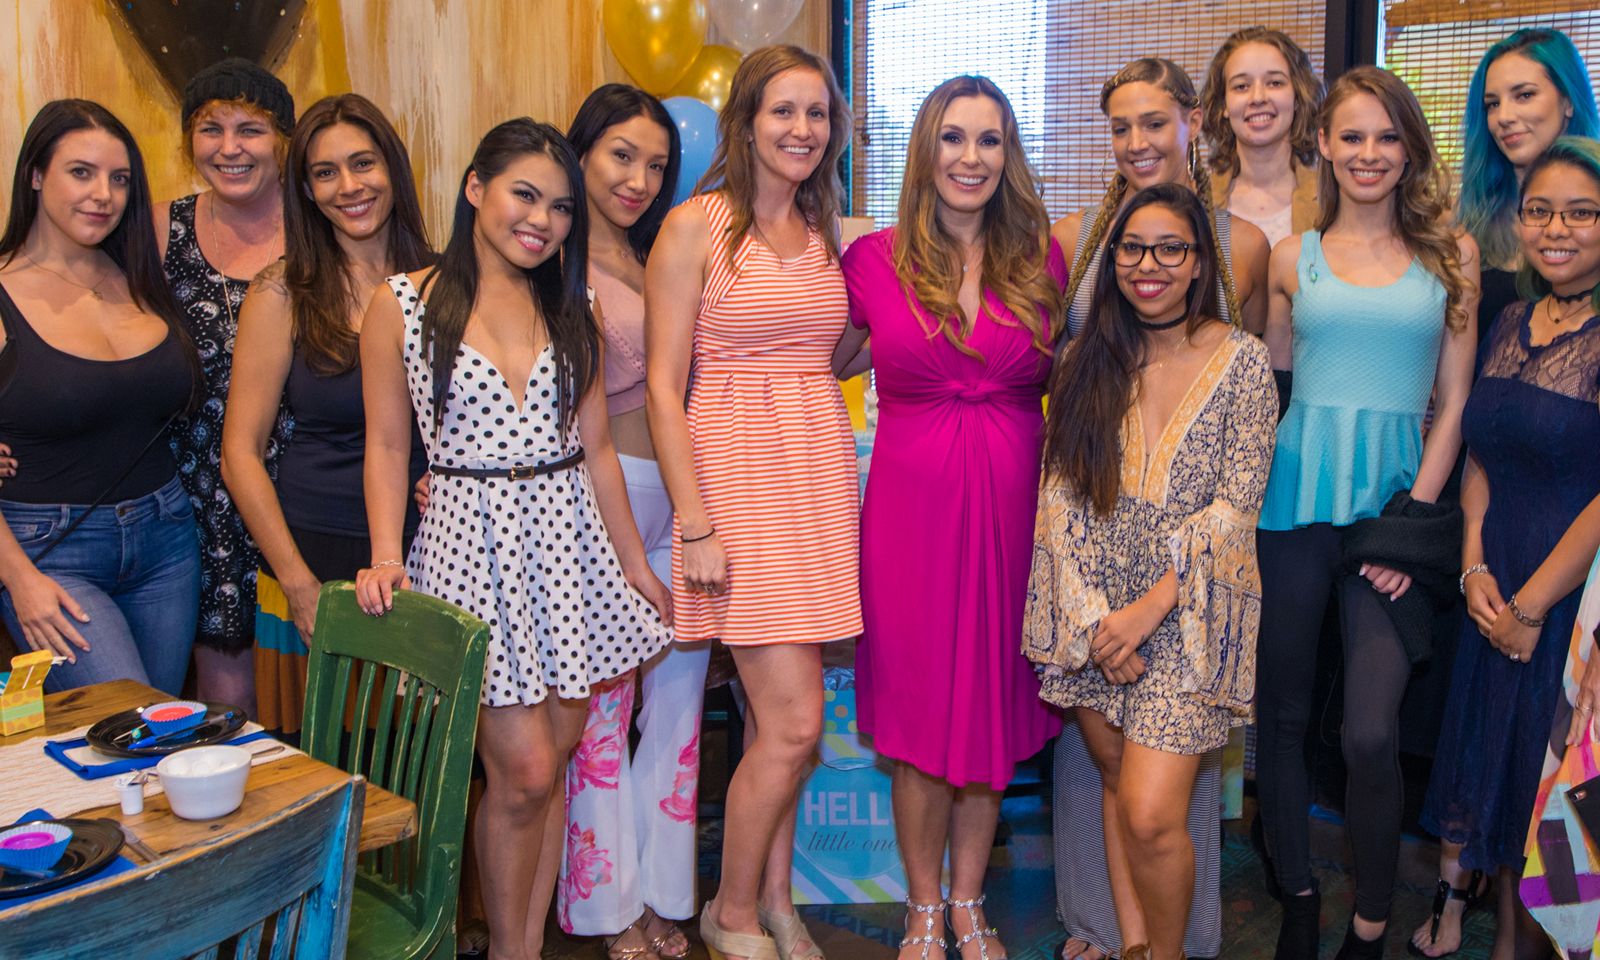 Tanya Tate Shares Photos from Star-Studded Baby Shower